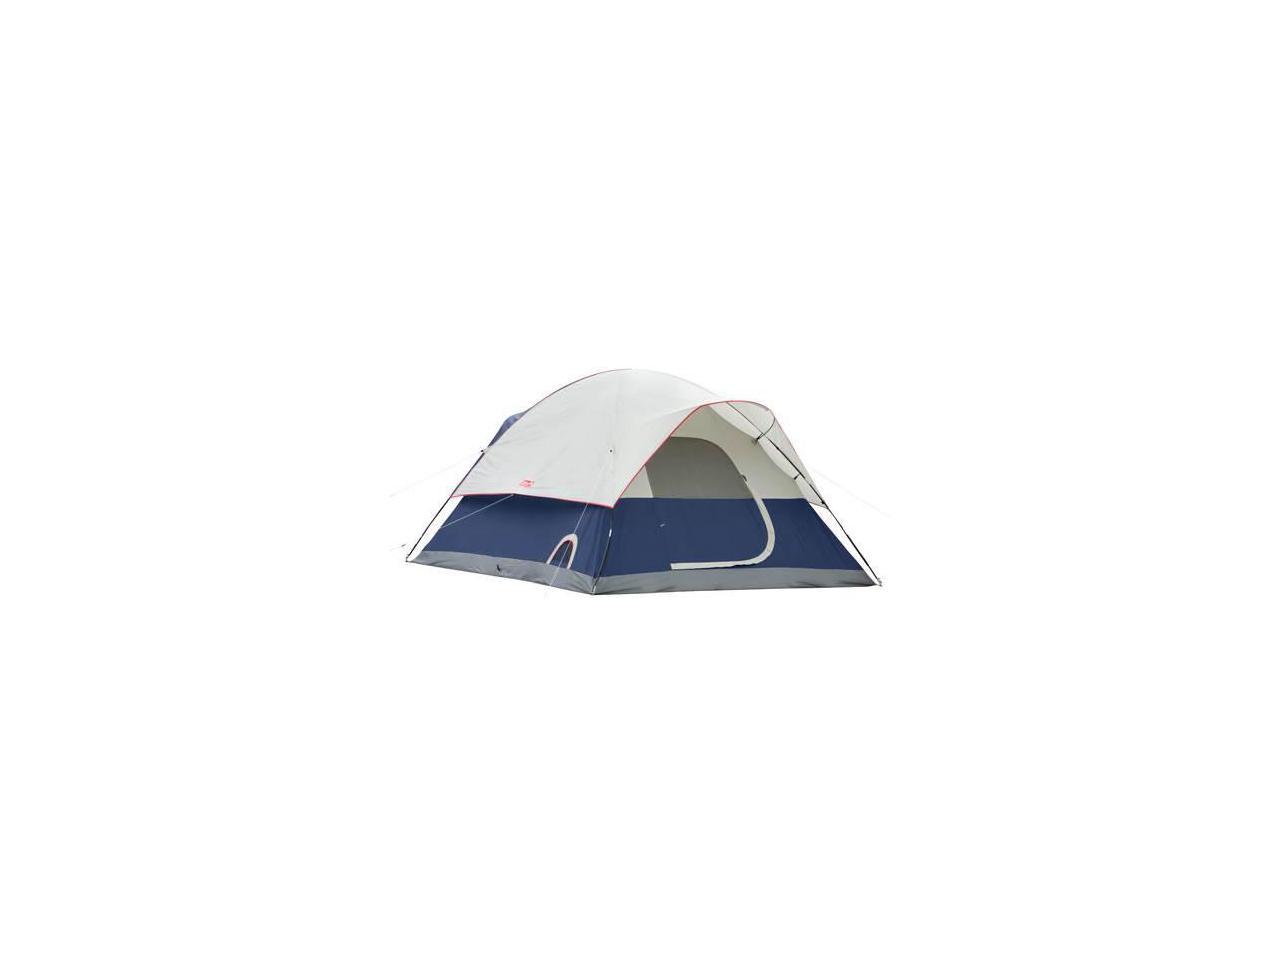 Coleman Elite Sundome 12x10 6 Person Tent with LED Light System